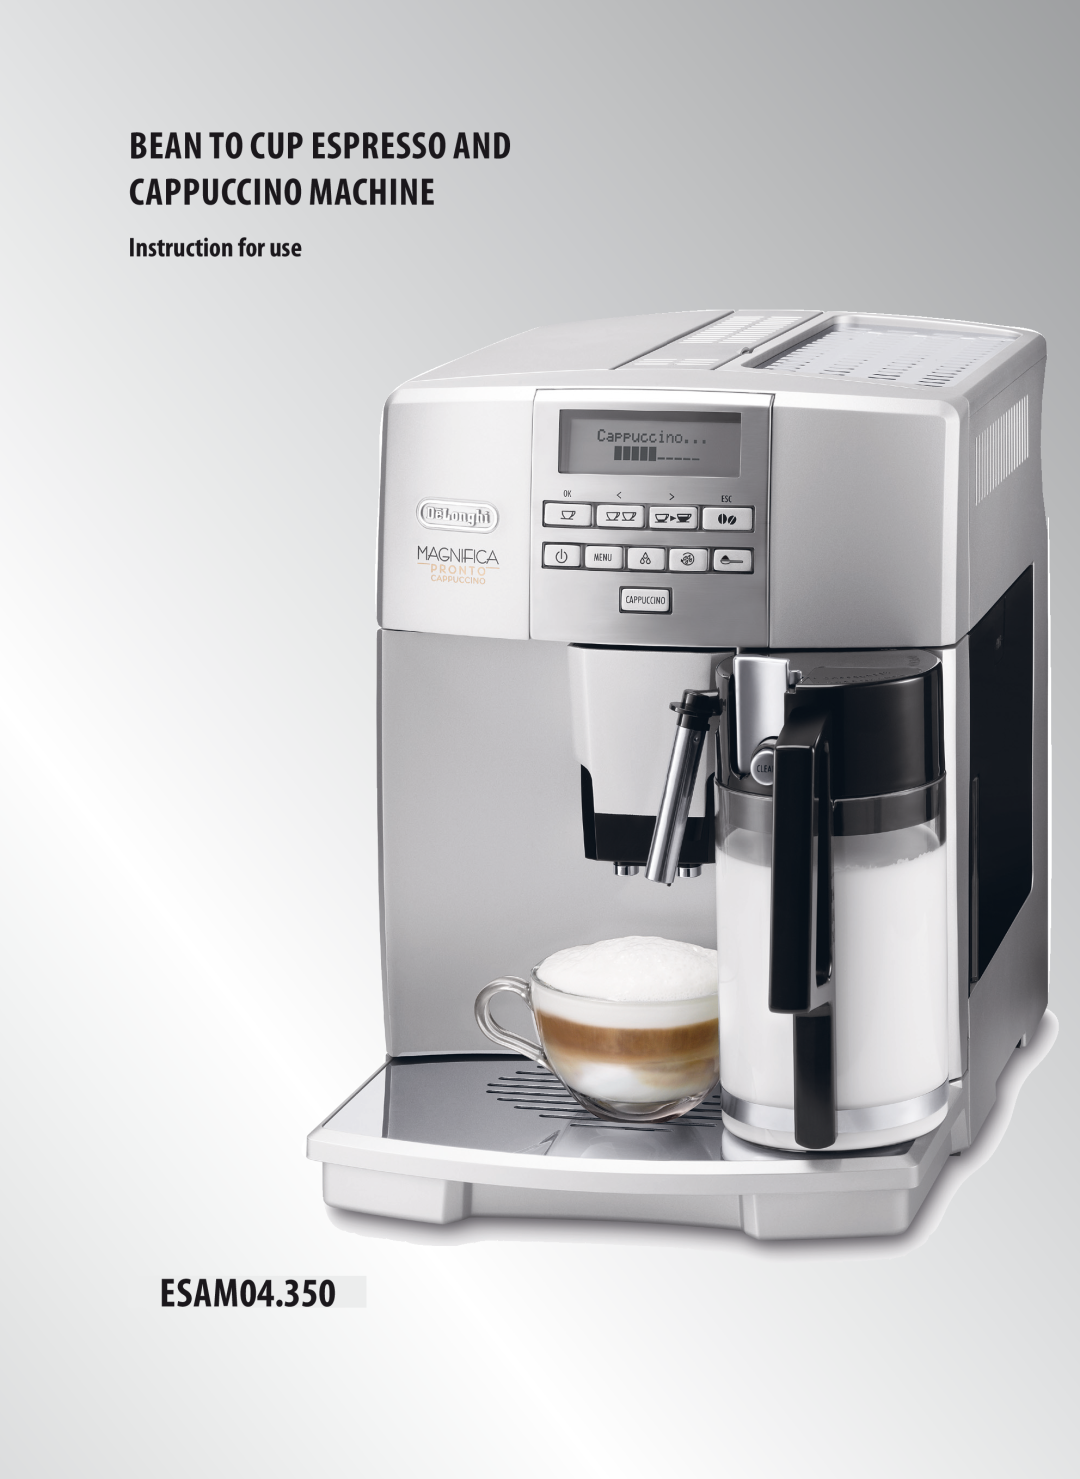 DeLonghi ESAM04.350 manual Bean To Cup Espresso And Cappuccino Machine, Instruction for use 